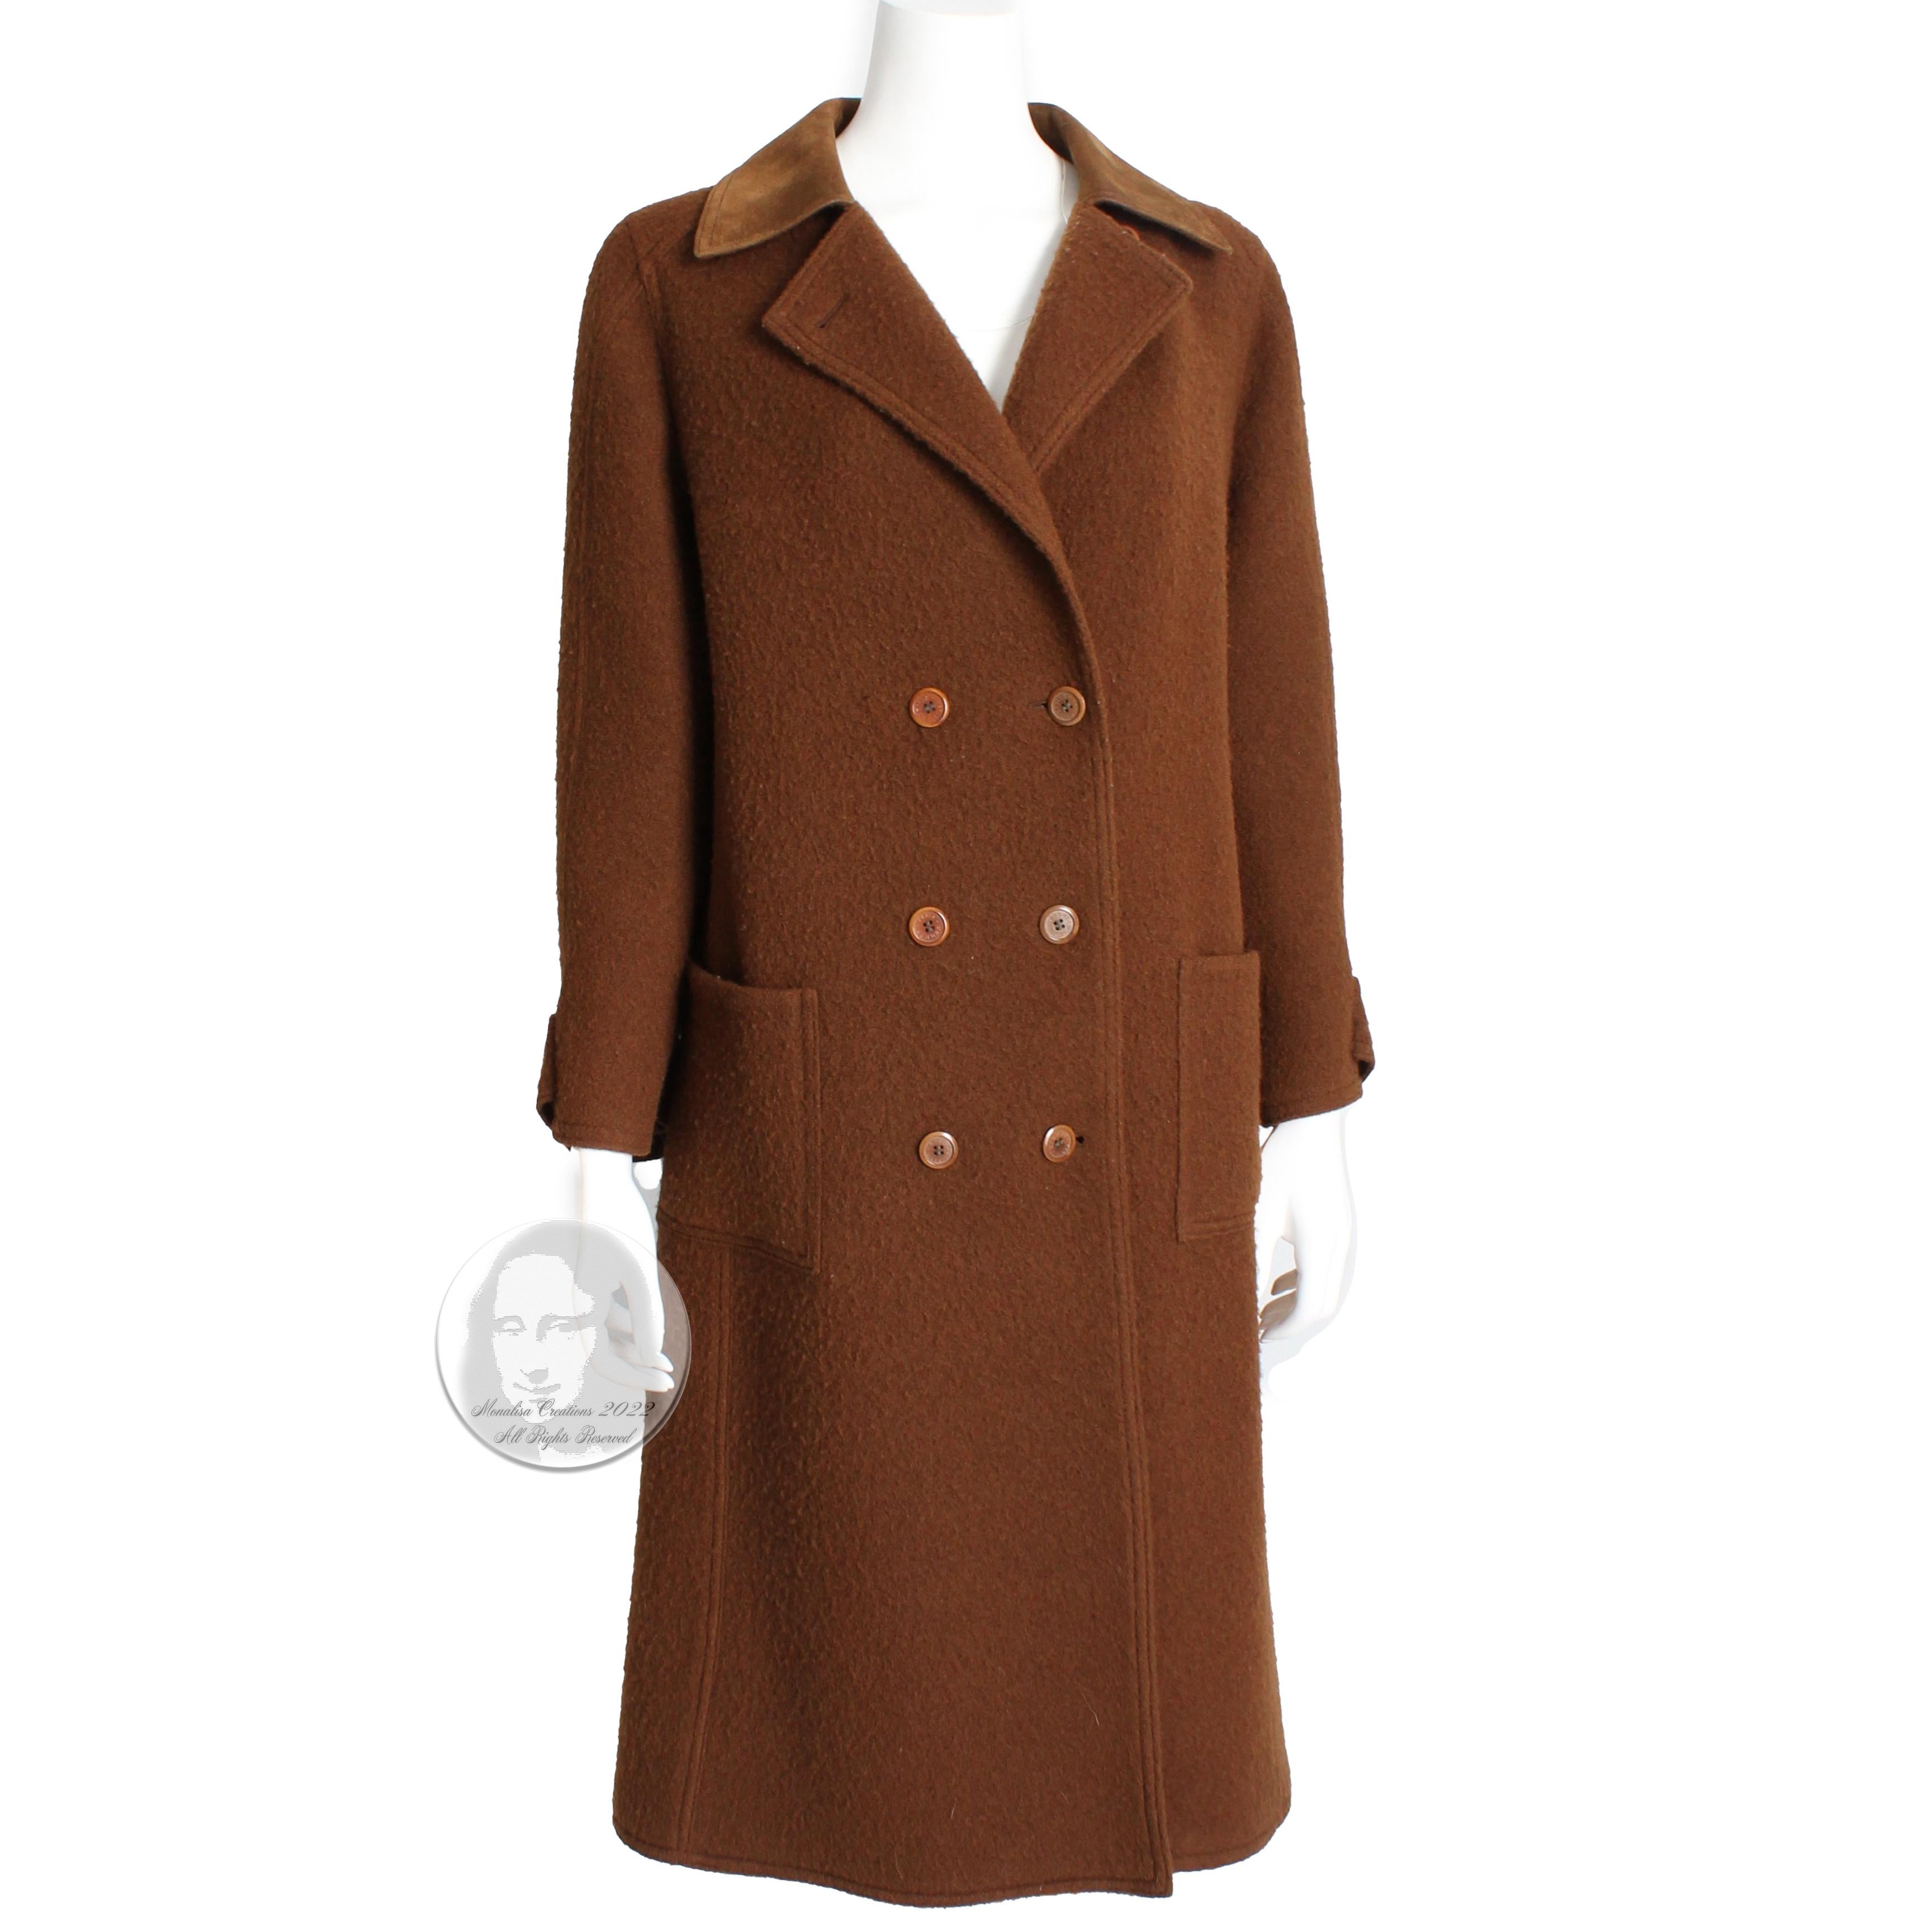 Hermes Brown Double Breasted Suede Leather Trim Trench Style Wool Coat, 1970s For Sale 1